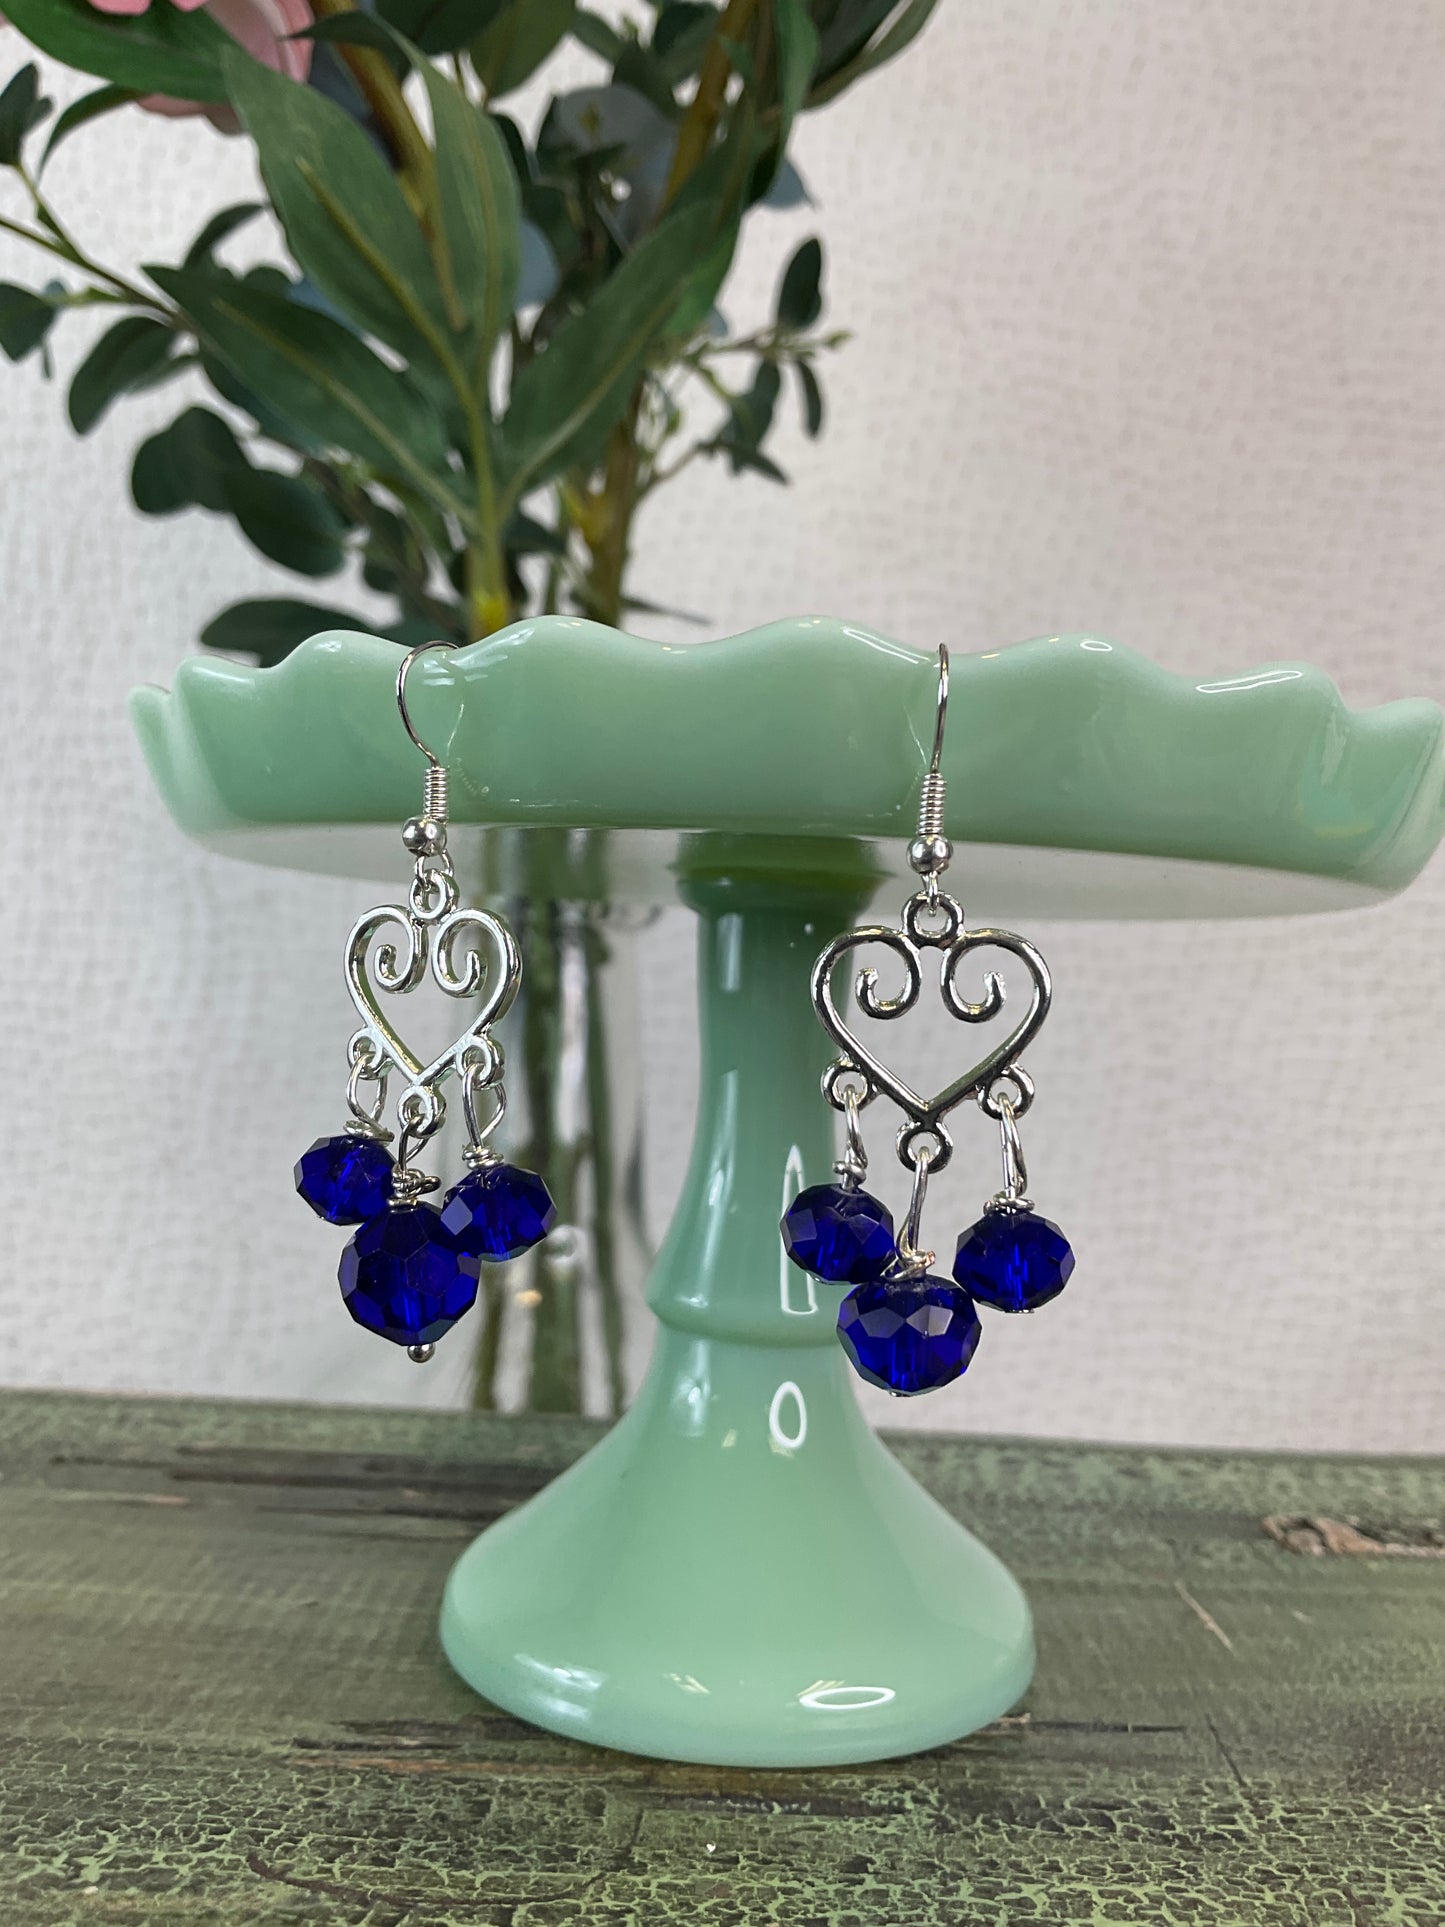 Scrolled Heart Droplet Earrings with Blue Beads